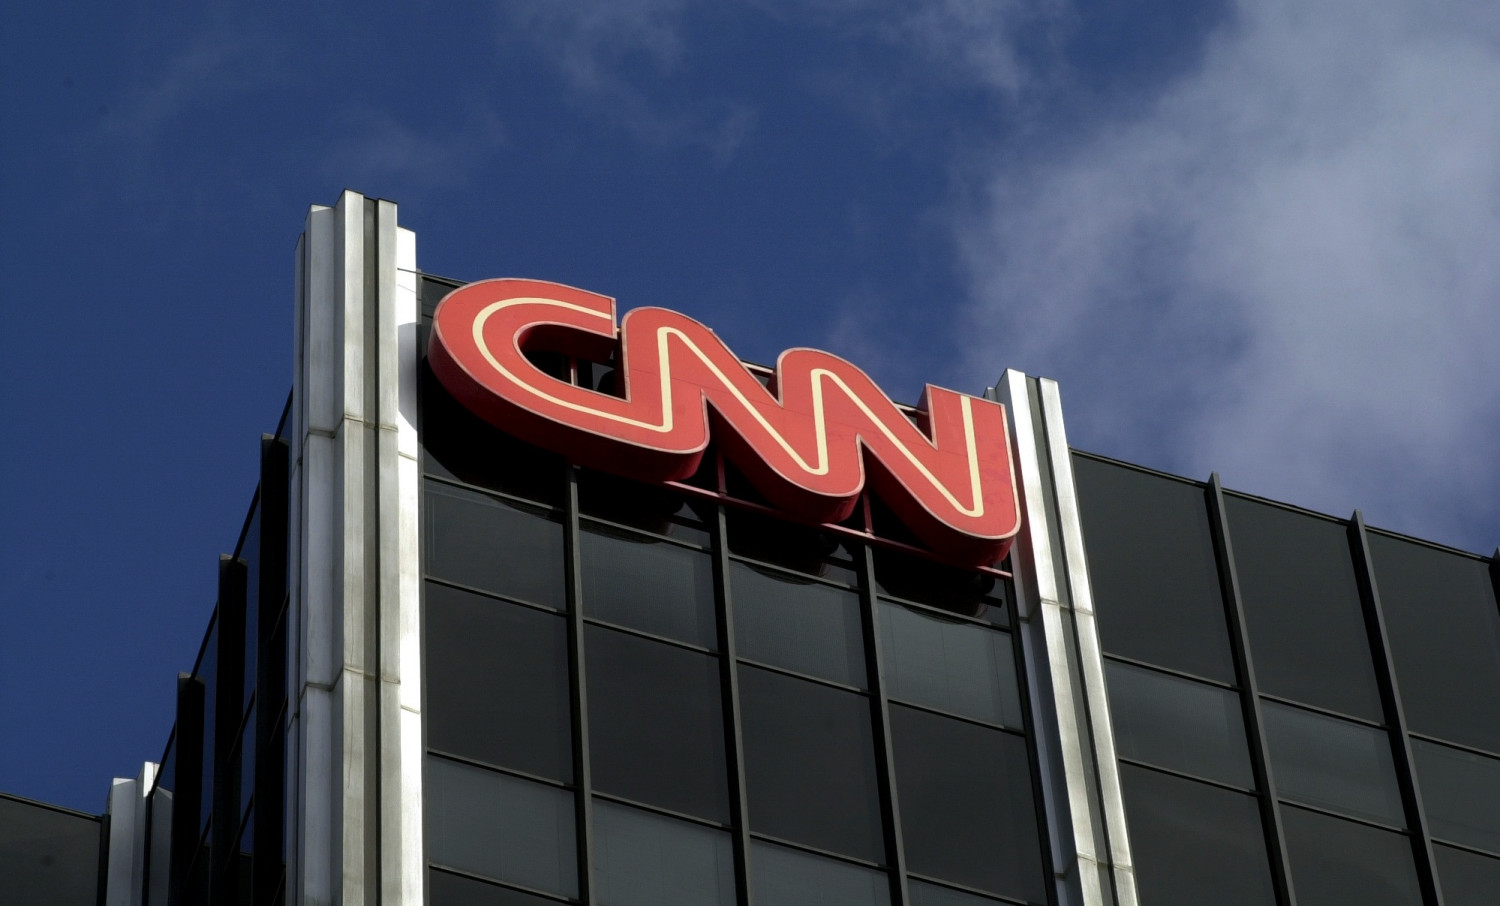 CNN Acknowledges Getting Sued for $275 Million by Covington Student